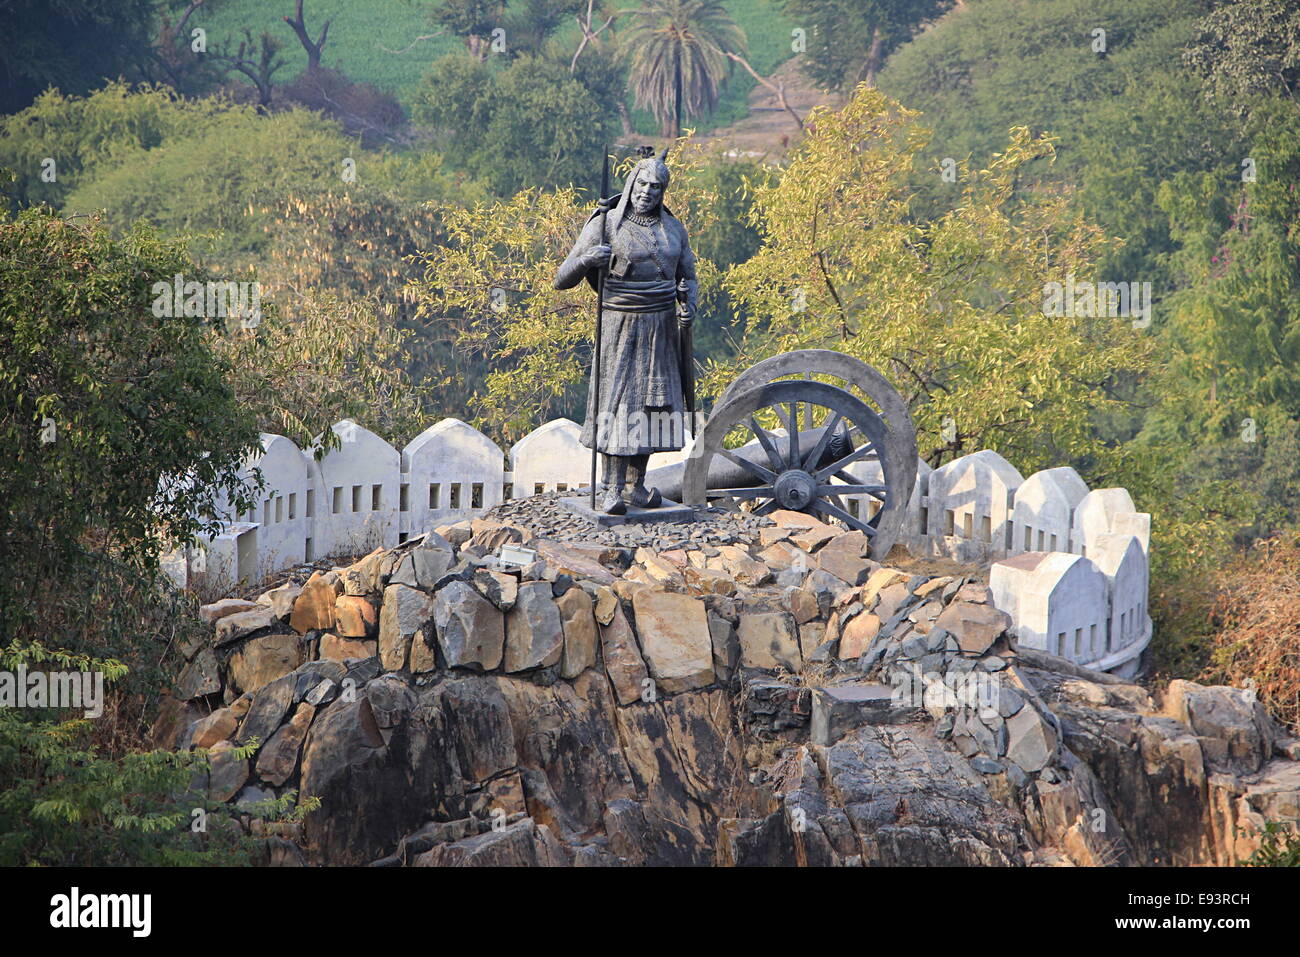 Statue of soldier holding spear standing near cannon on hillock near Pratap Smarak, Udaipur, Rajasthan, India, Asia Stock Photo